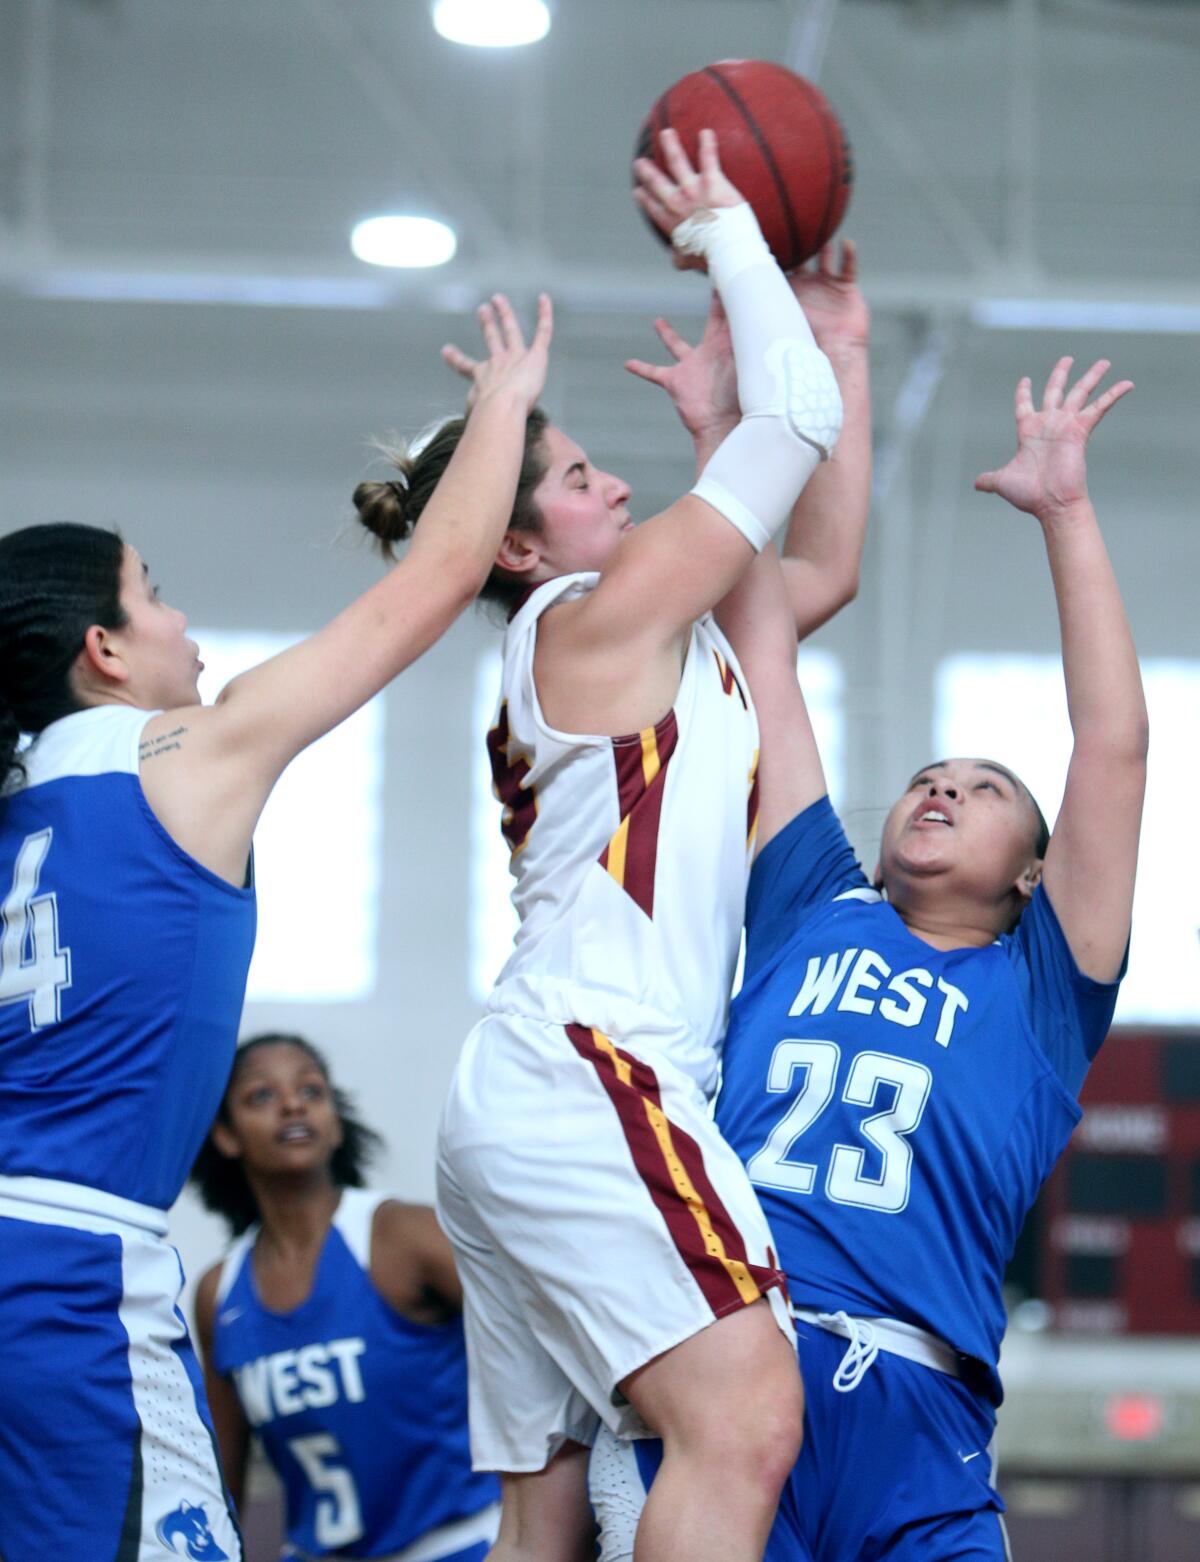 Glendale Community College basketball player Gloria Bianchi shoots under pressure in game vs. West Los Angeles College, at home in Glendale on Saturday, Feb. 1, 2020. GCC won it's 21st consecutive game 78-55.